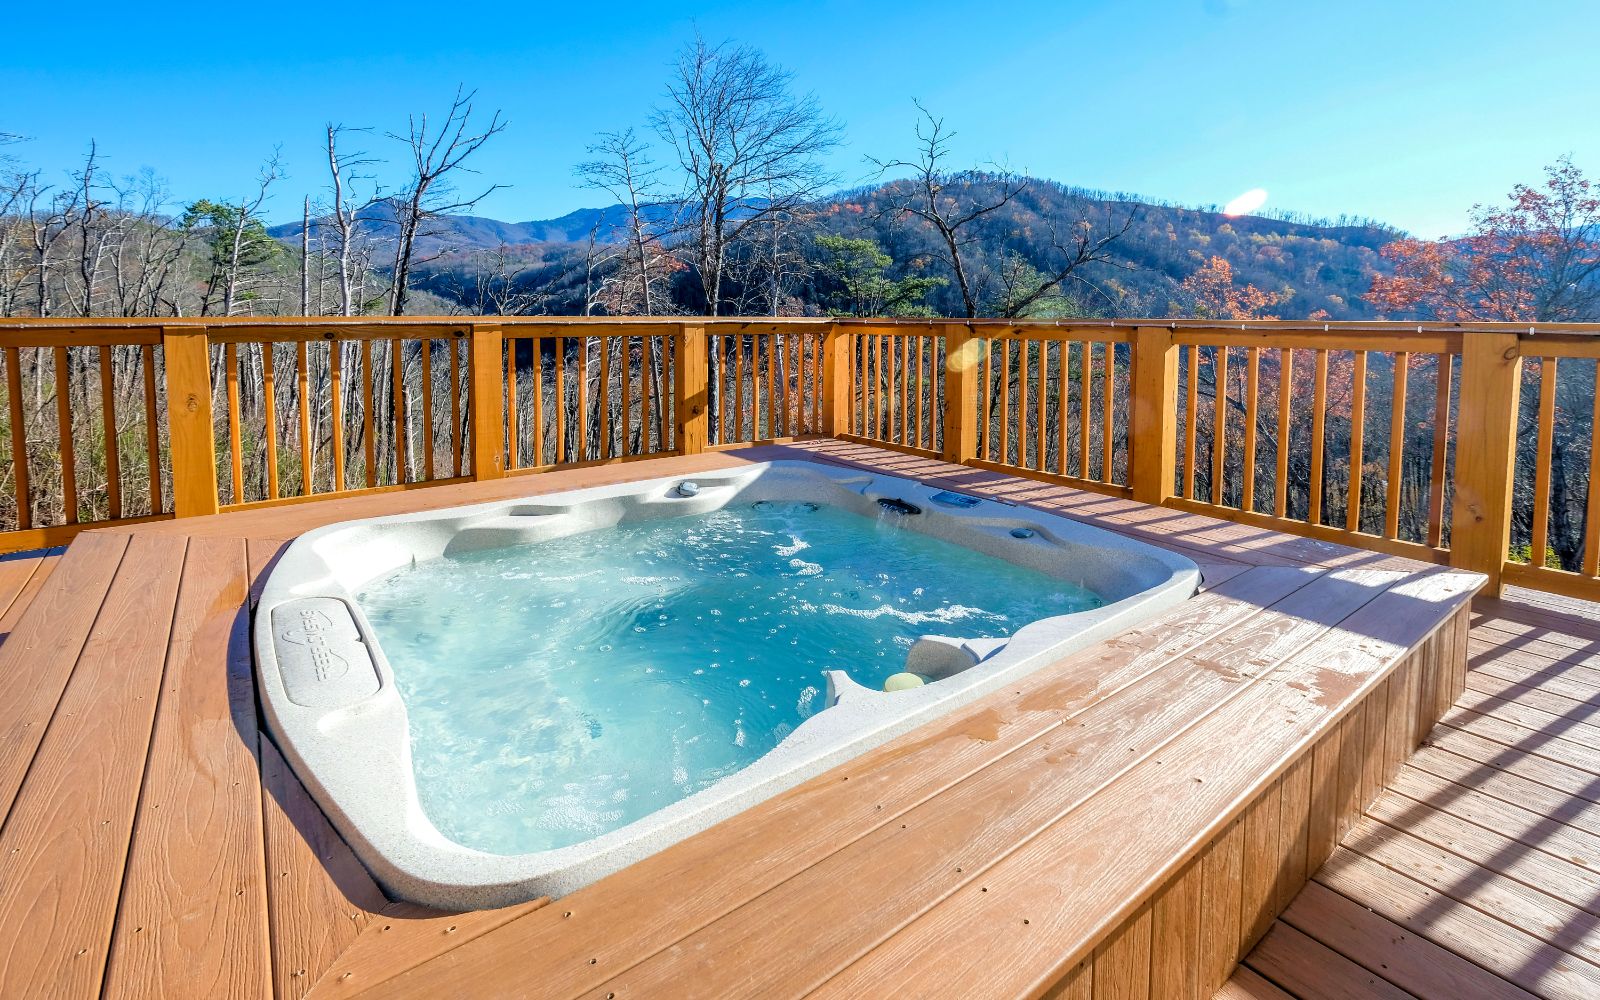 New Fox Lodge - Sweet Mountain View from Hot Tub